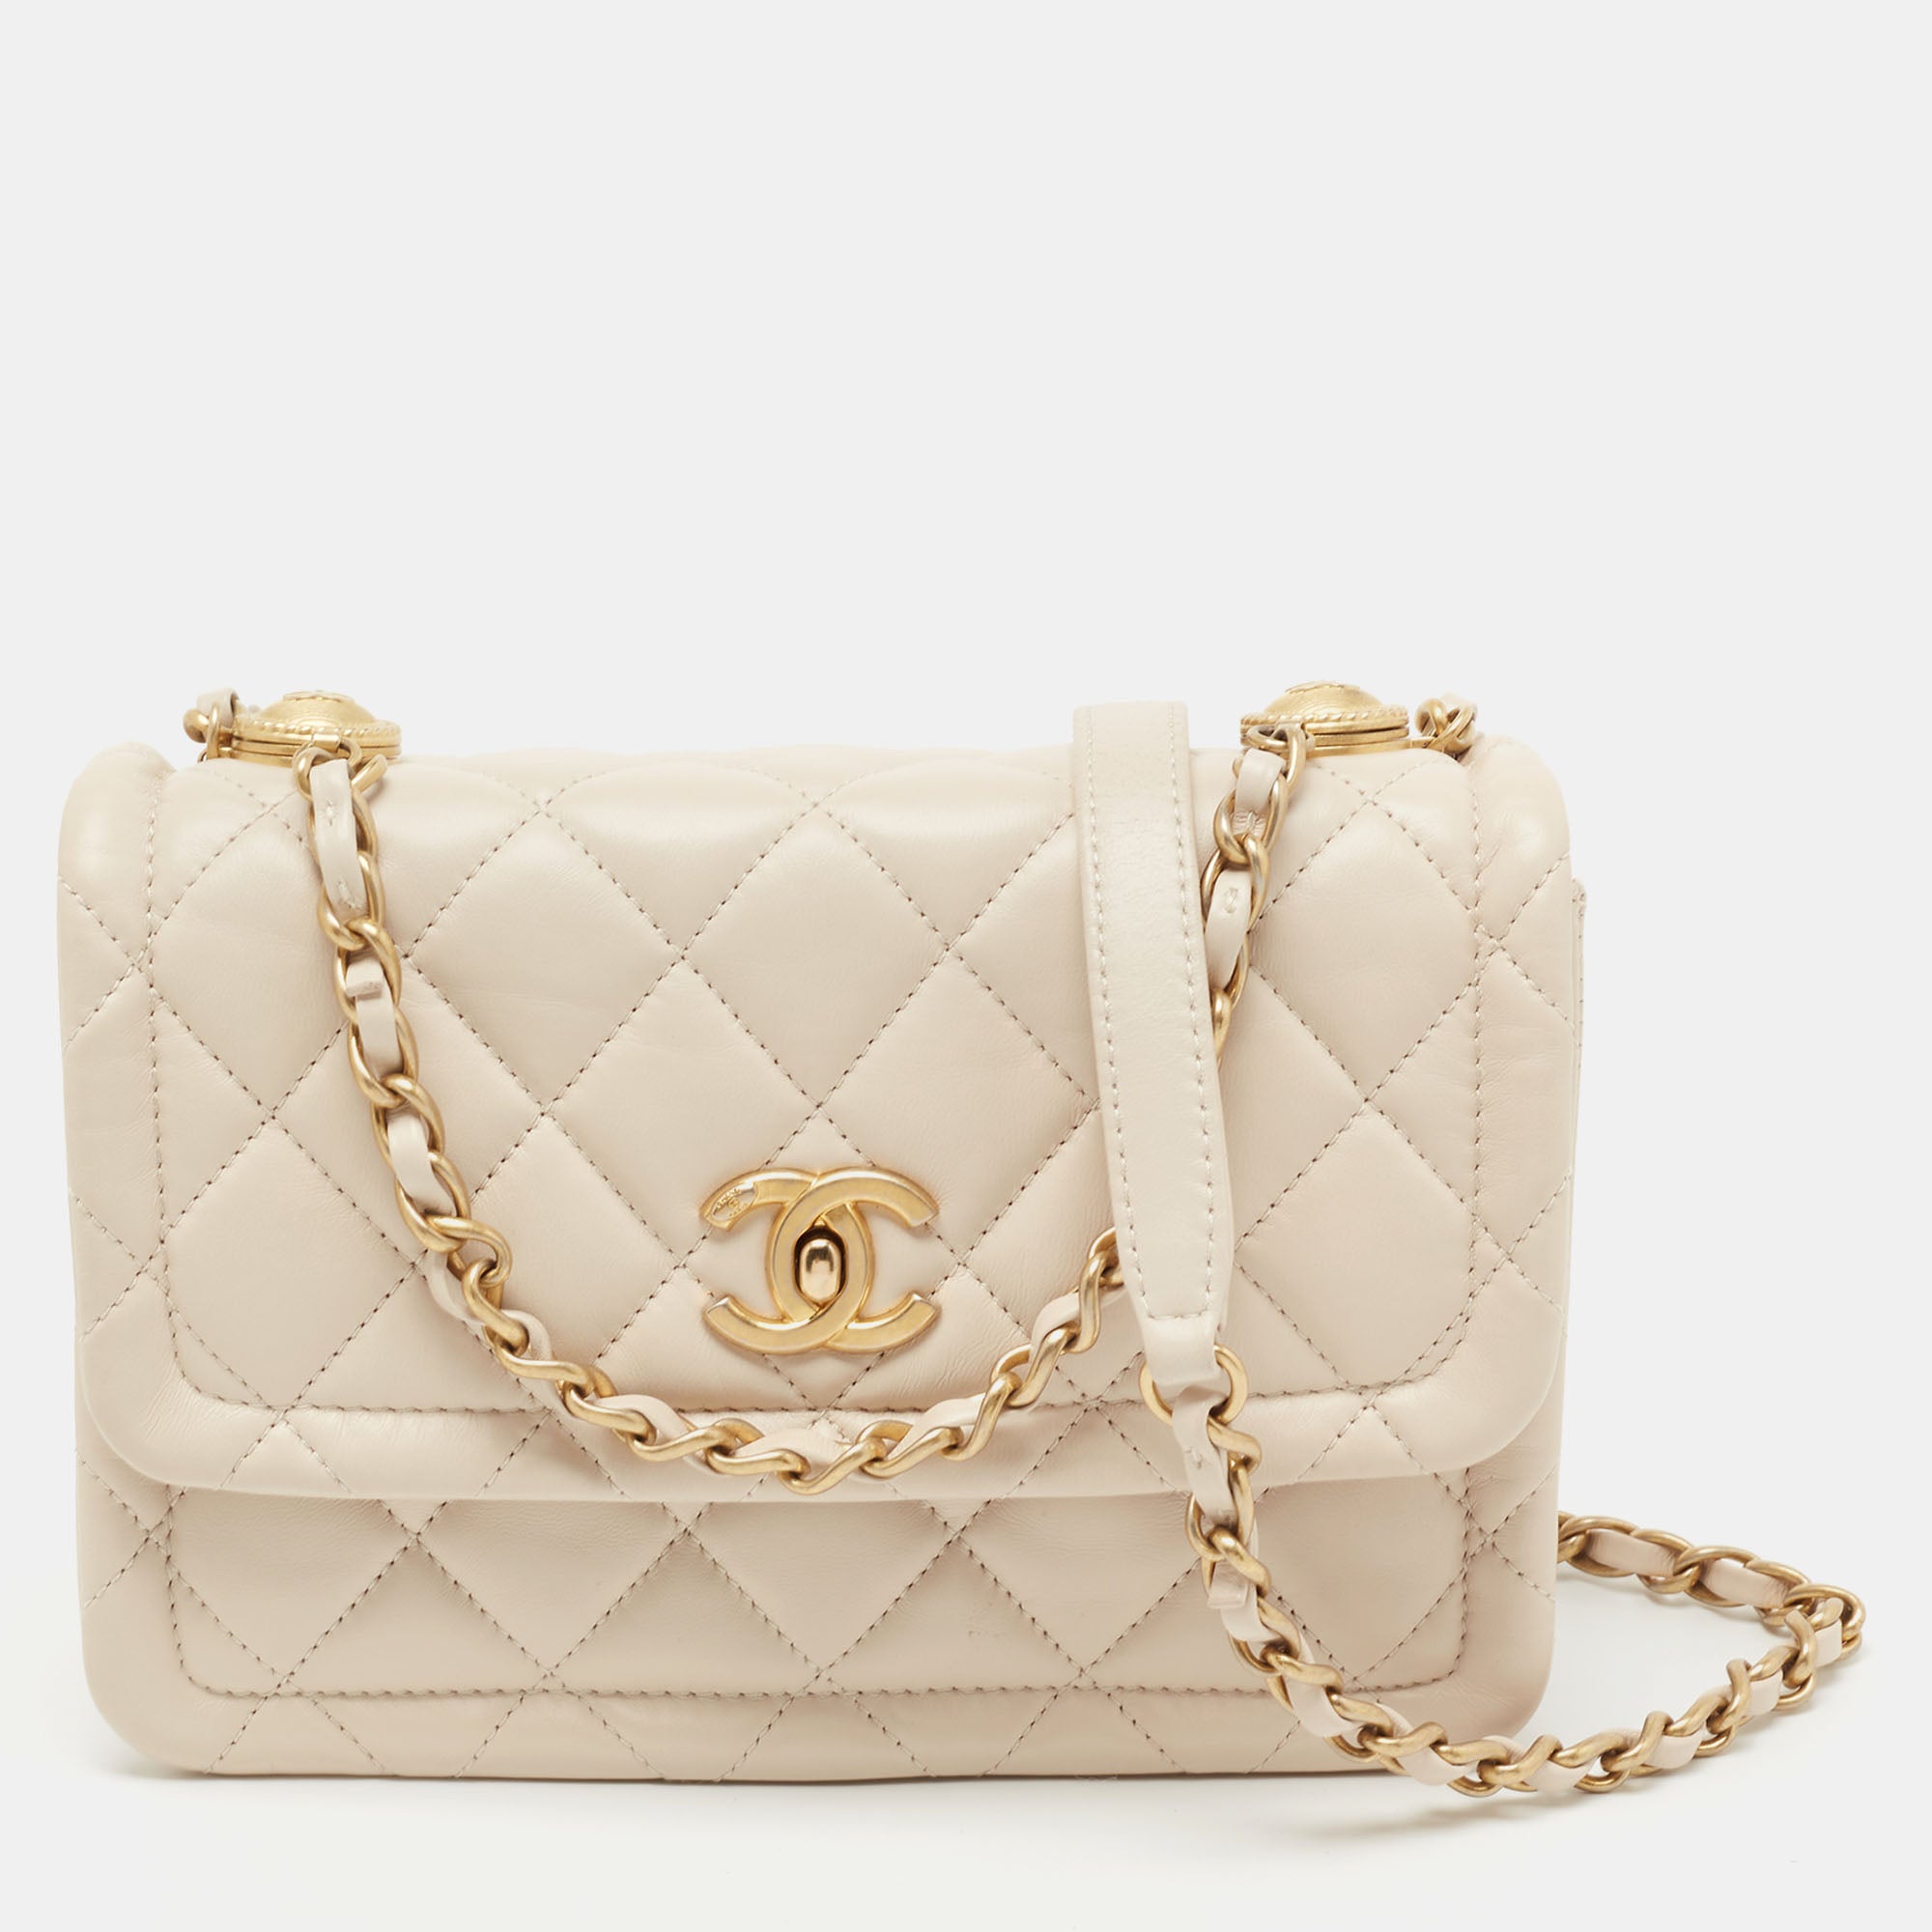 Chanel Beige Quilted Leather Button Up Flap Bag